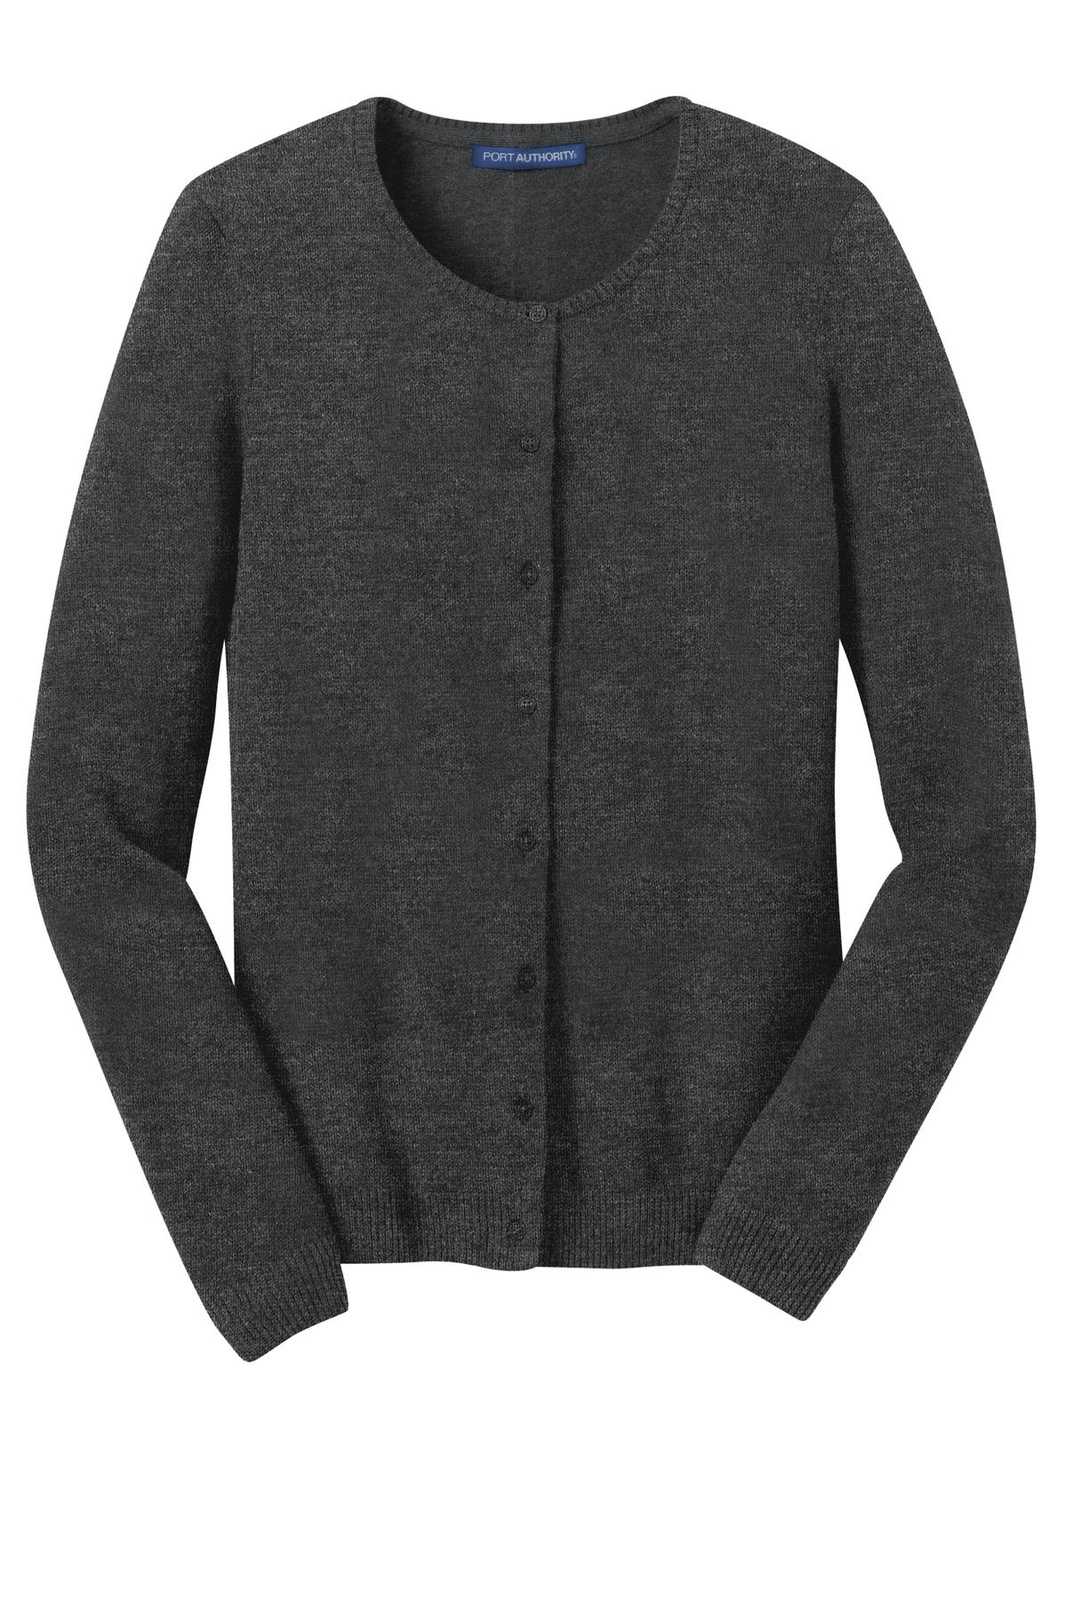 Port Authority LSW287 Ladies Cardigan Sweater - Charcoal Heather - HIT a Double - 5